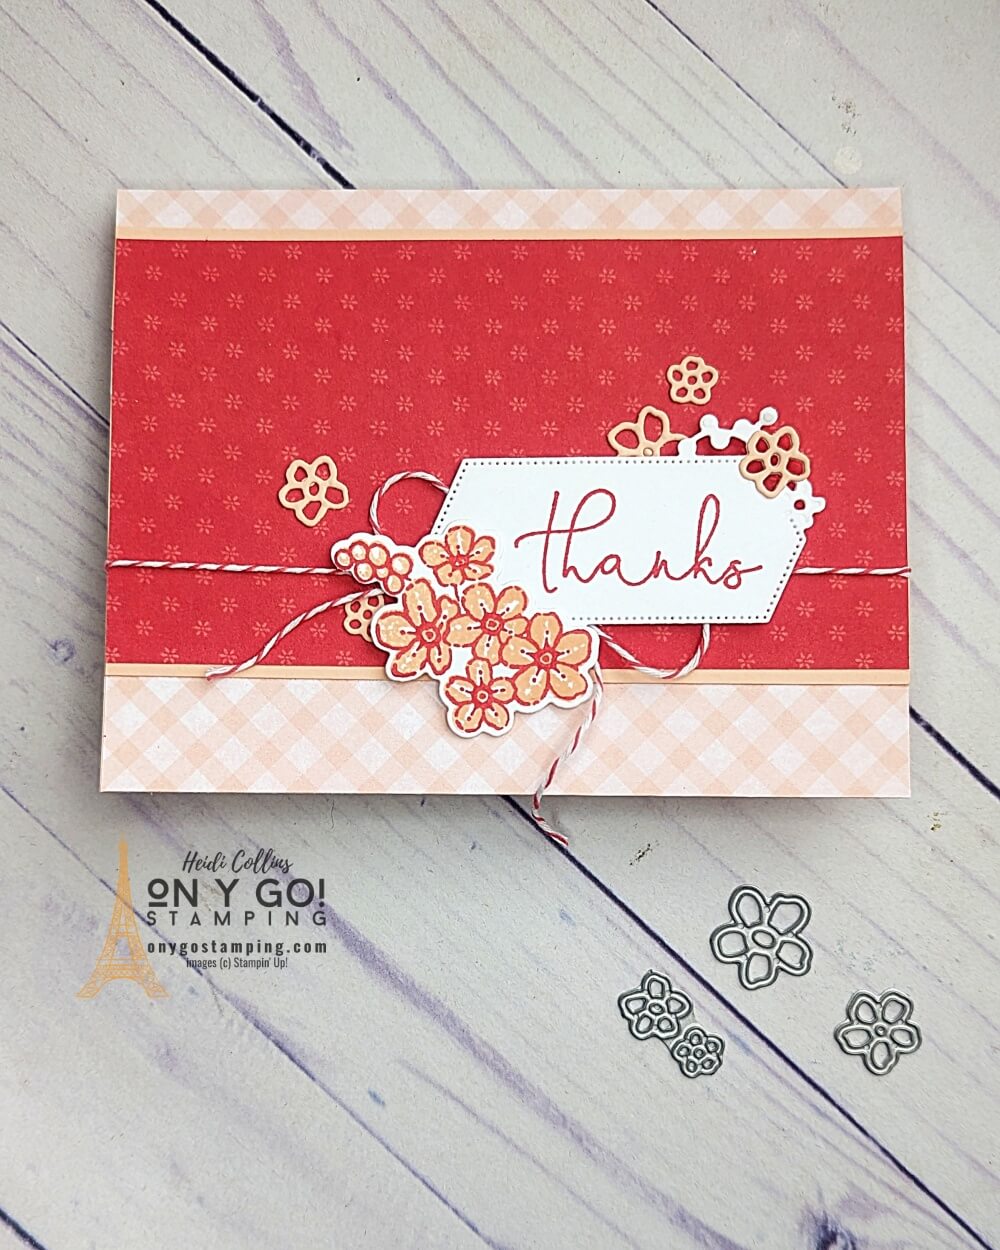 Making a handmade card with patterned paper is a beautiful way to express your gratitude and thoughts. This project will use the Sentimental Park stamp set and Tea Boutique DSP from Stampin' Up! With the right materials, anyone can craft a heartfelt card that will leave a lasting impression on the recipient.